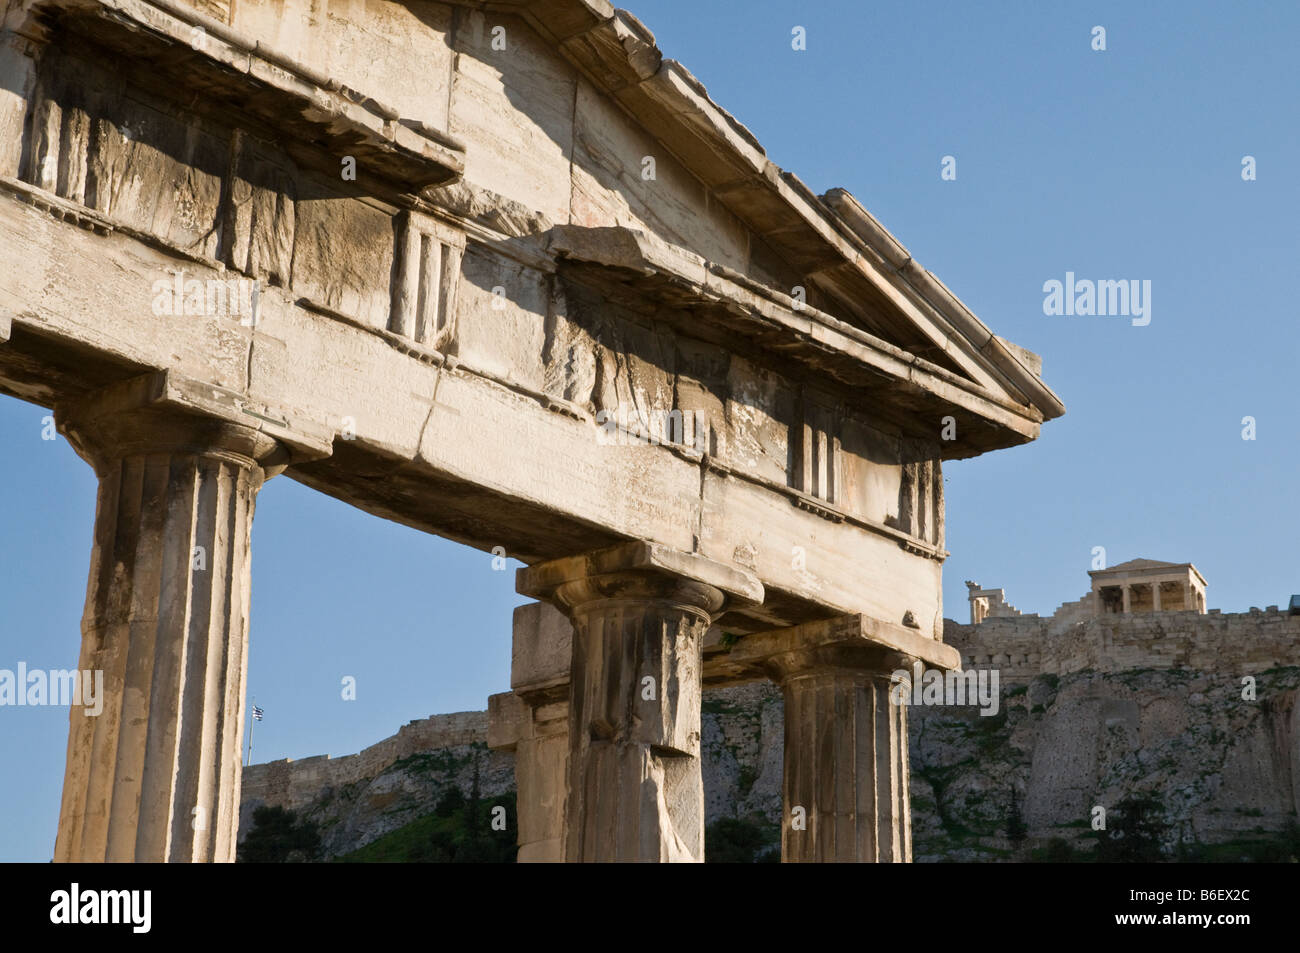 The Gate of Athena Archegetis in the Roman Forum with the Erechtheion on the Acropolis in the background, Plaka, Athens Greece Stock Photo